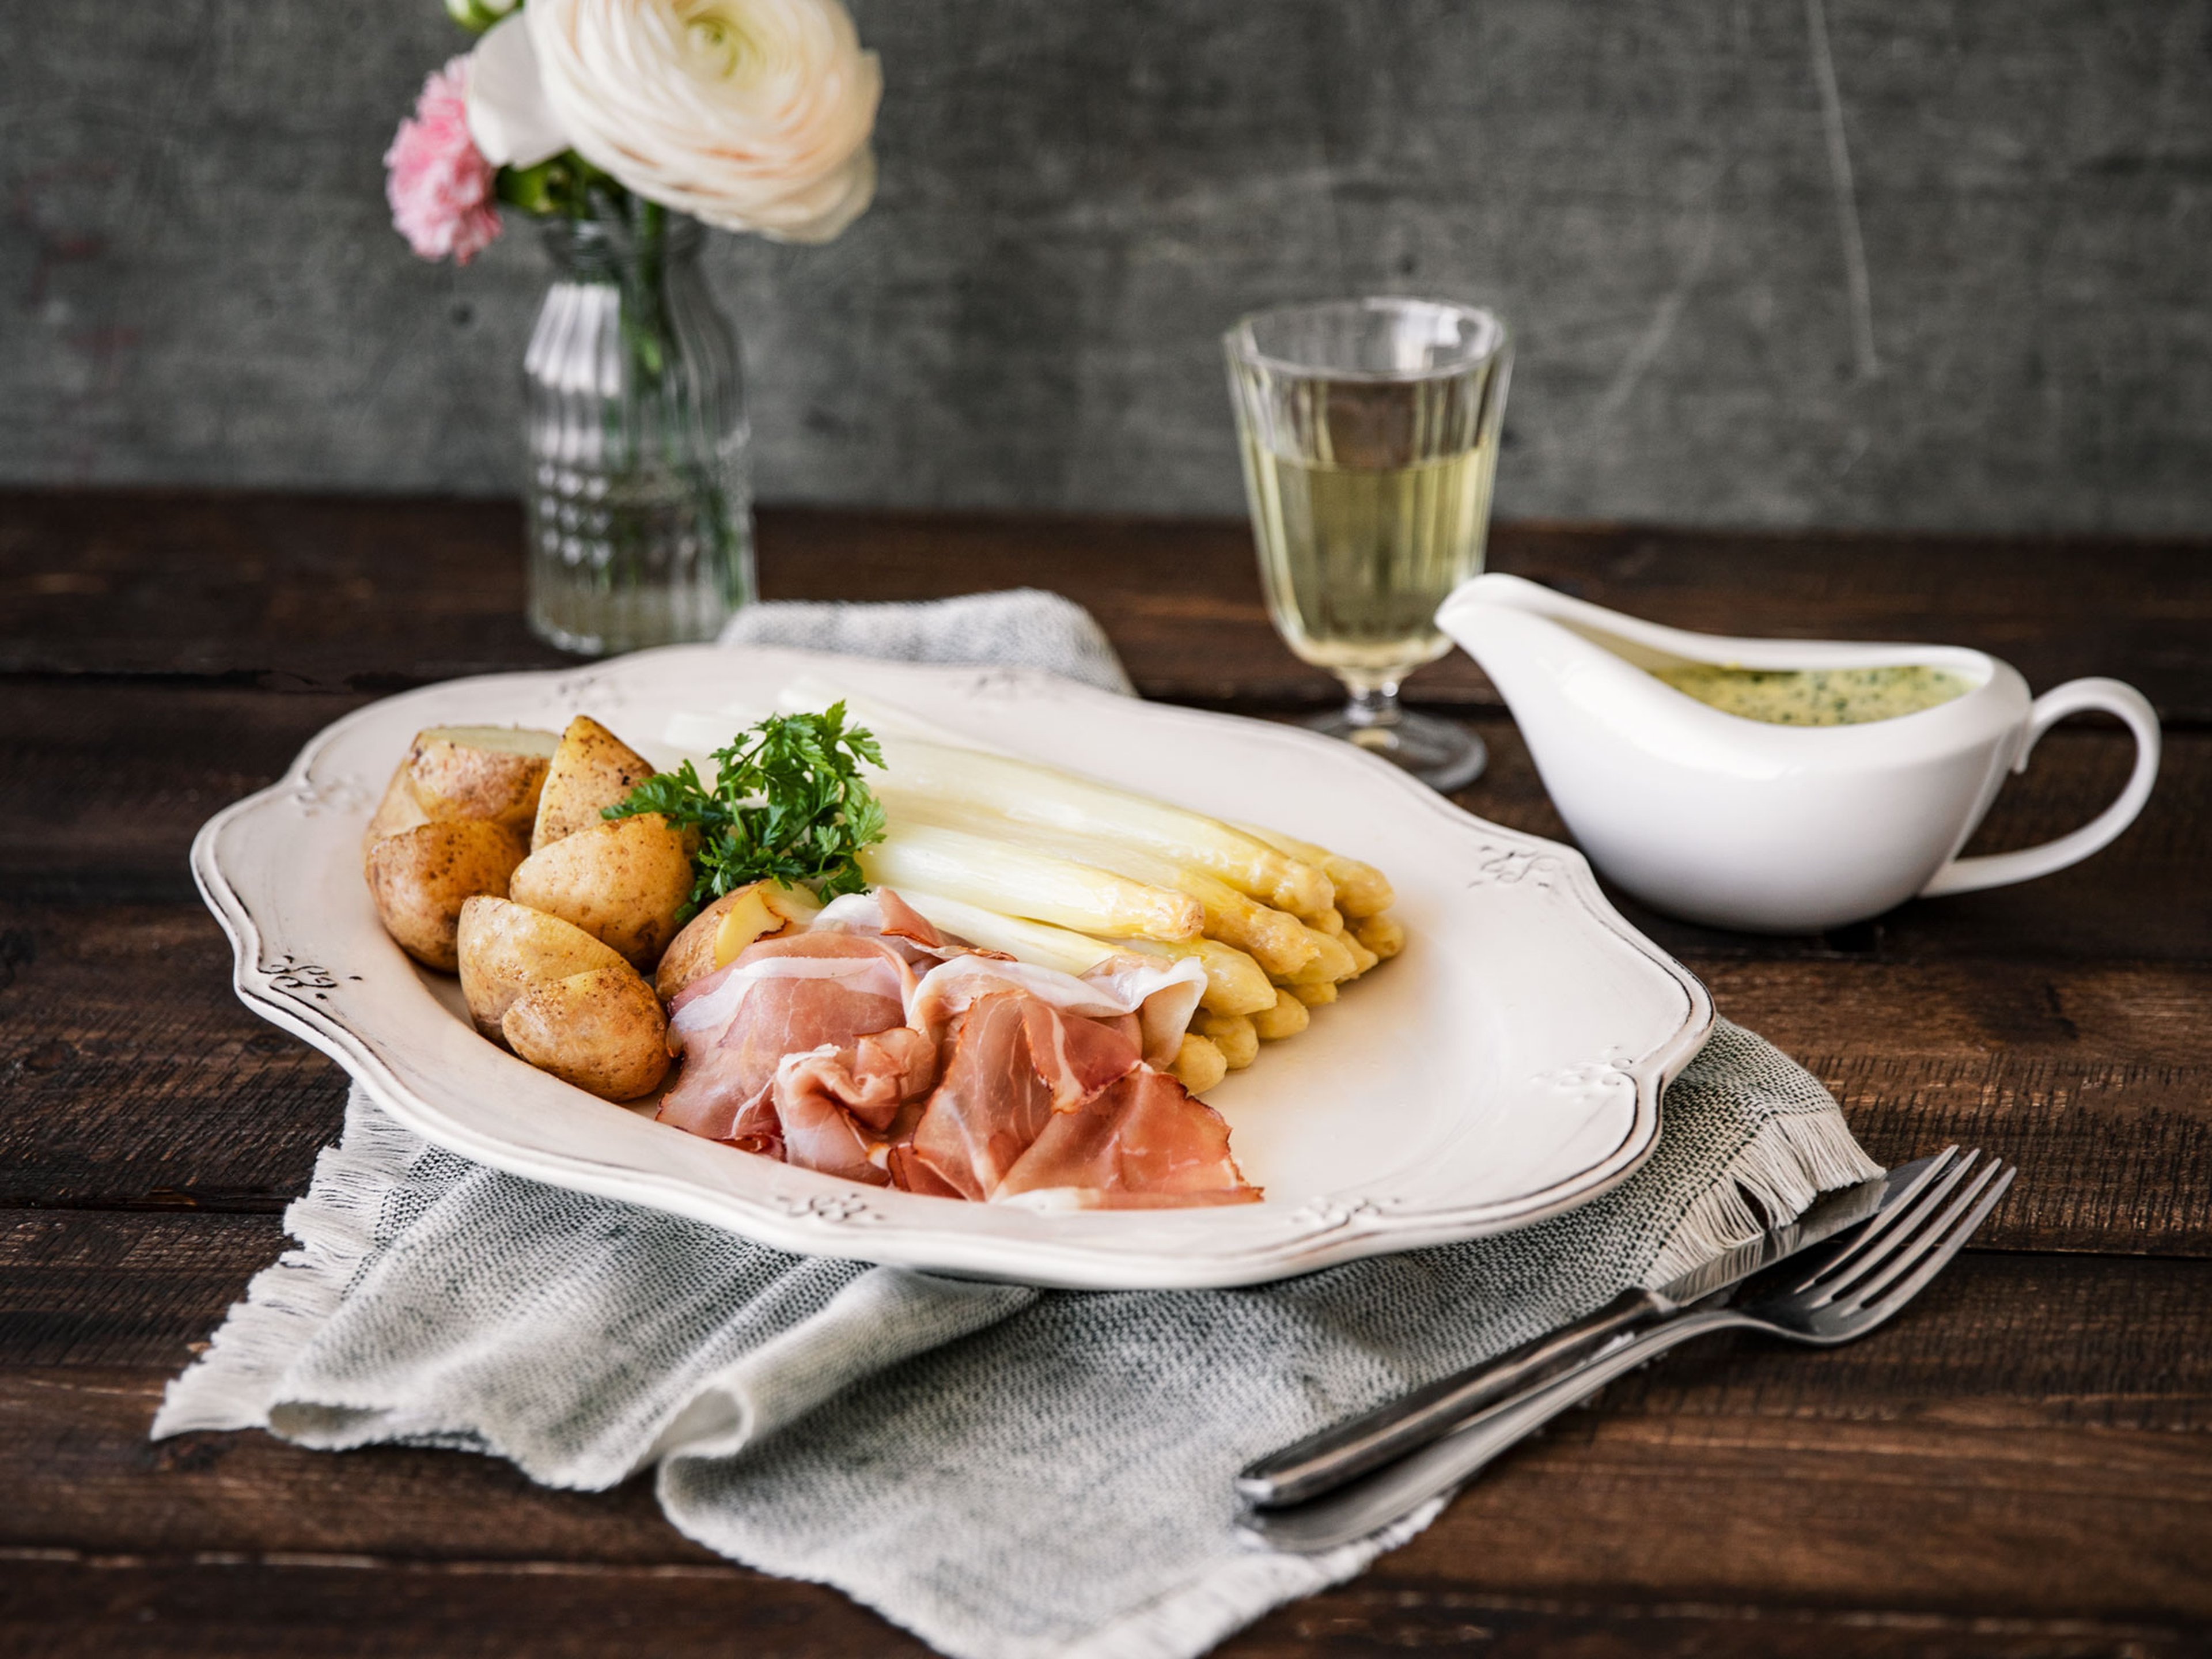 White asparagus with ham and Béarnaise sauce